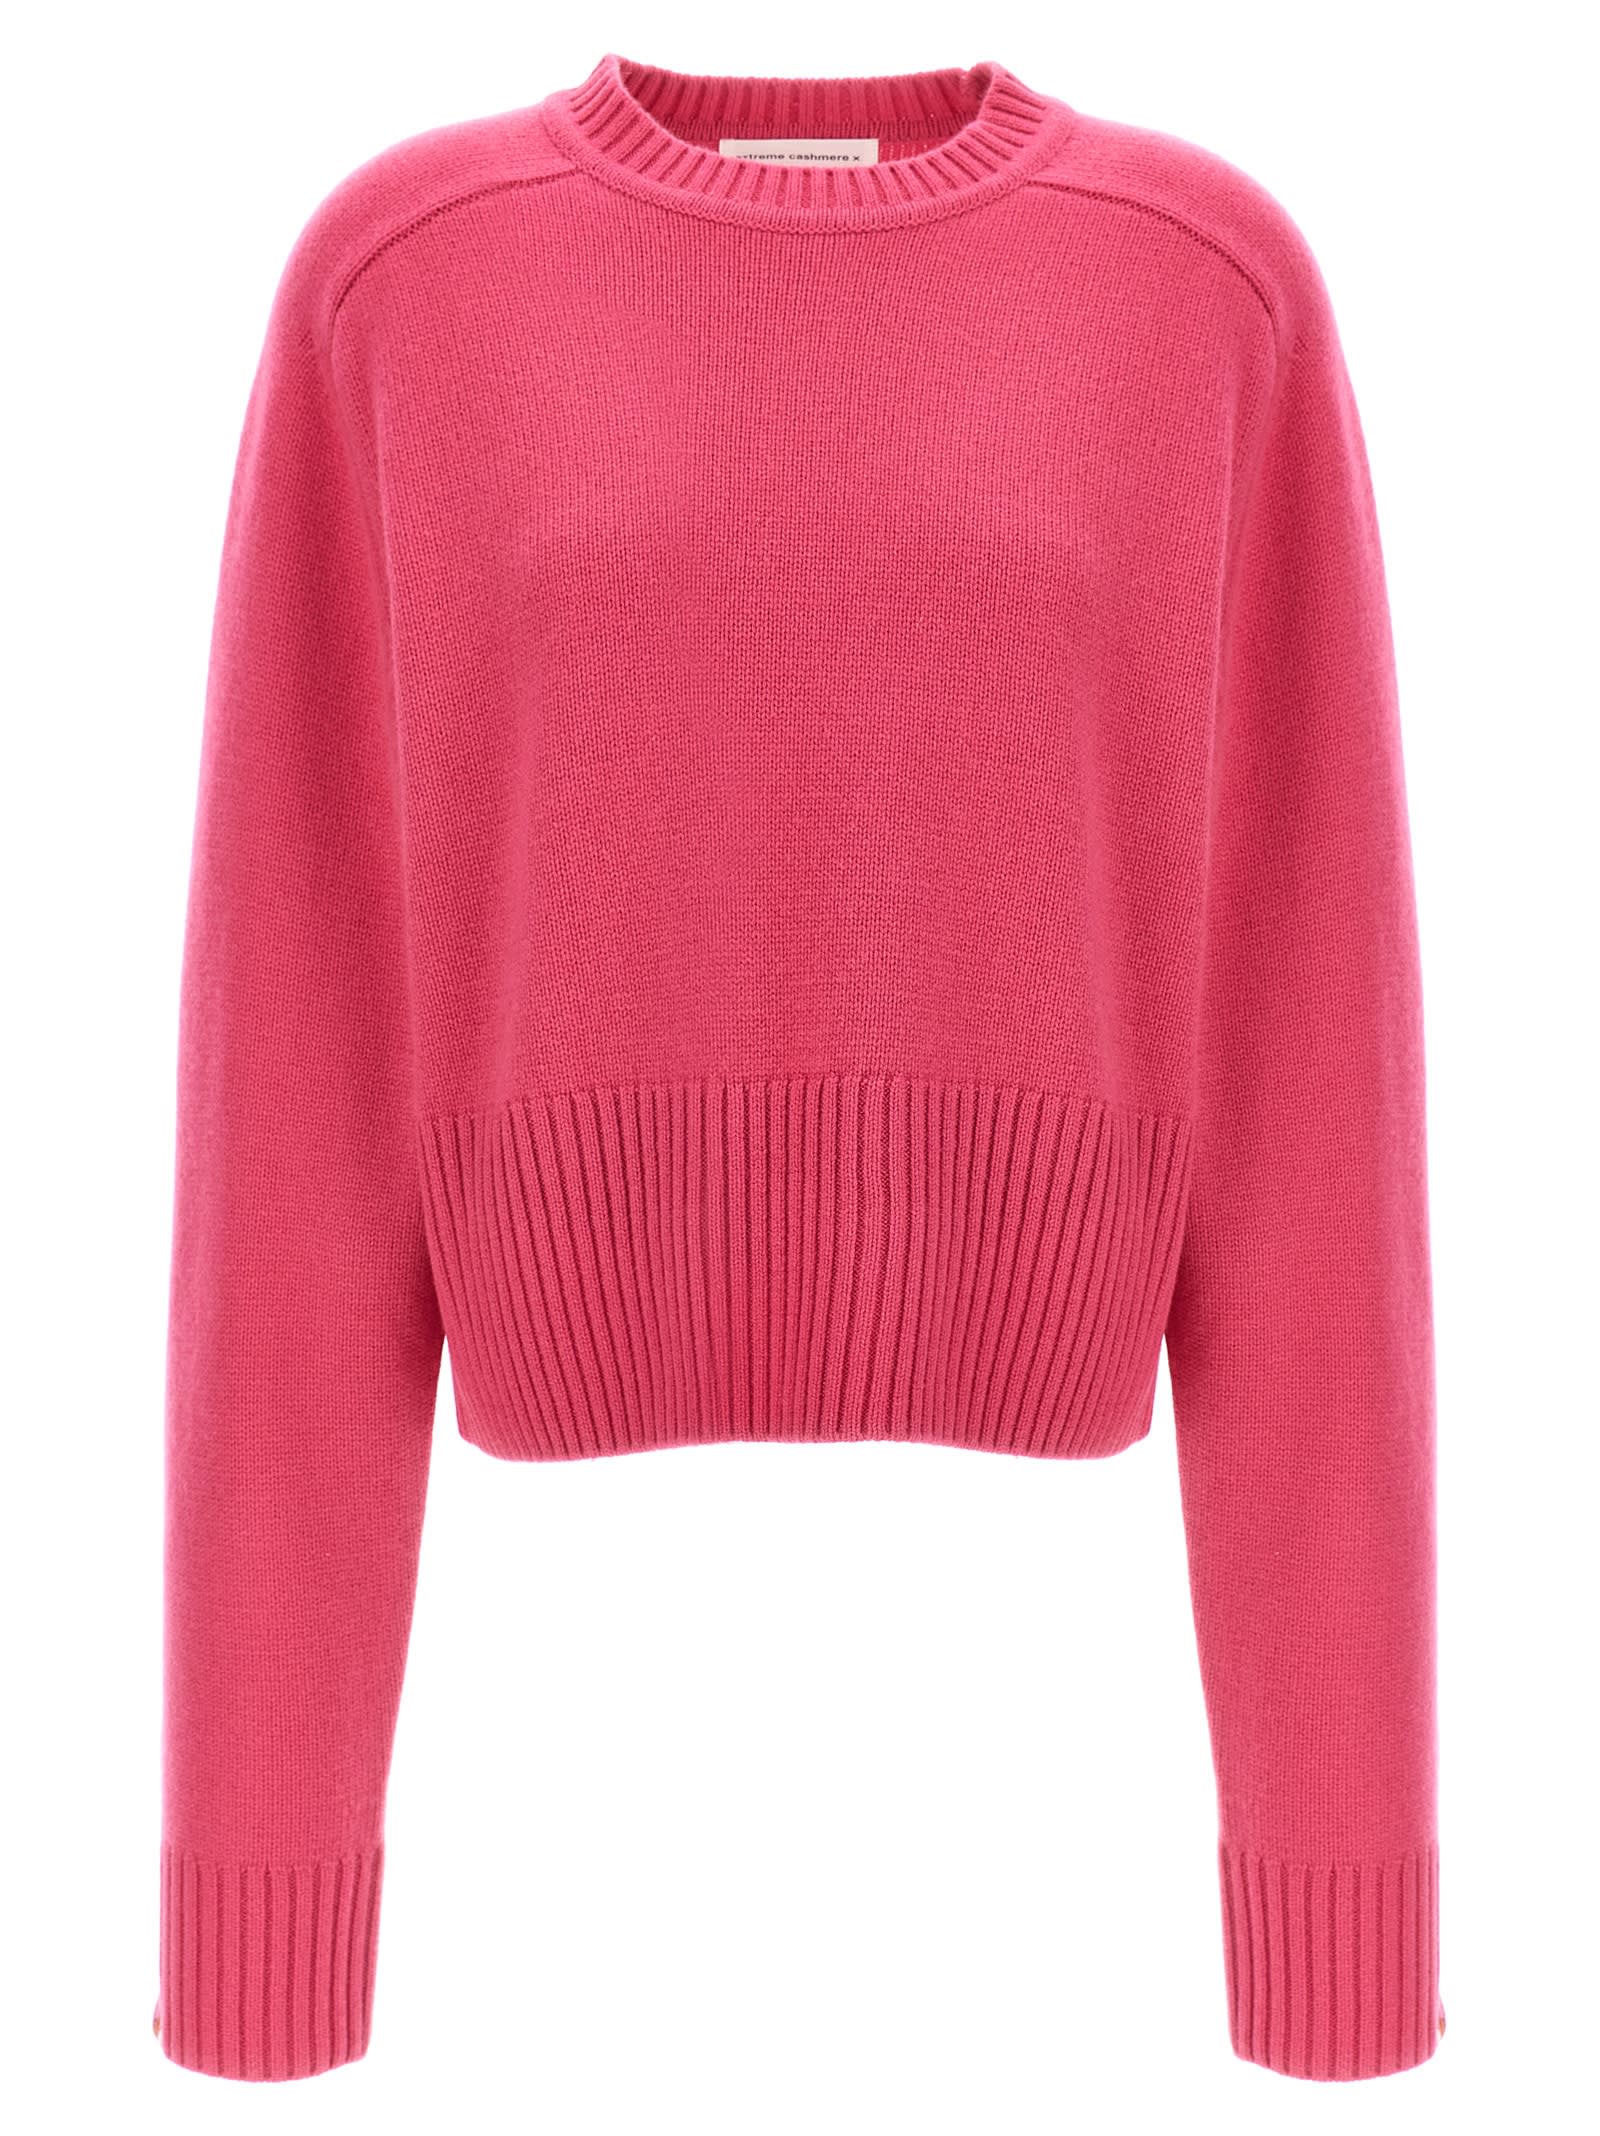 EXTREME CASHMERE N°256 JUDITH SWEATER